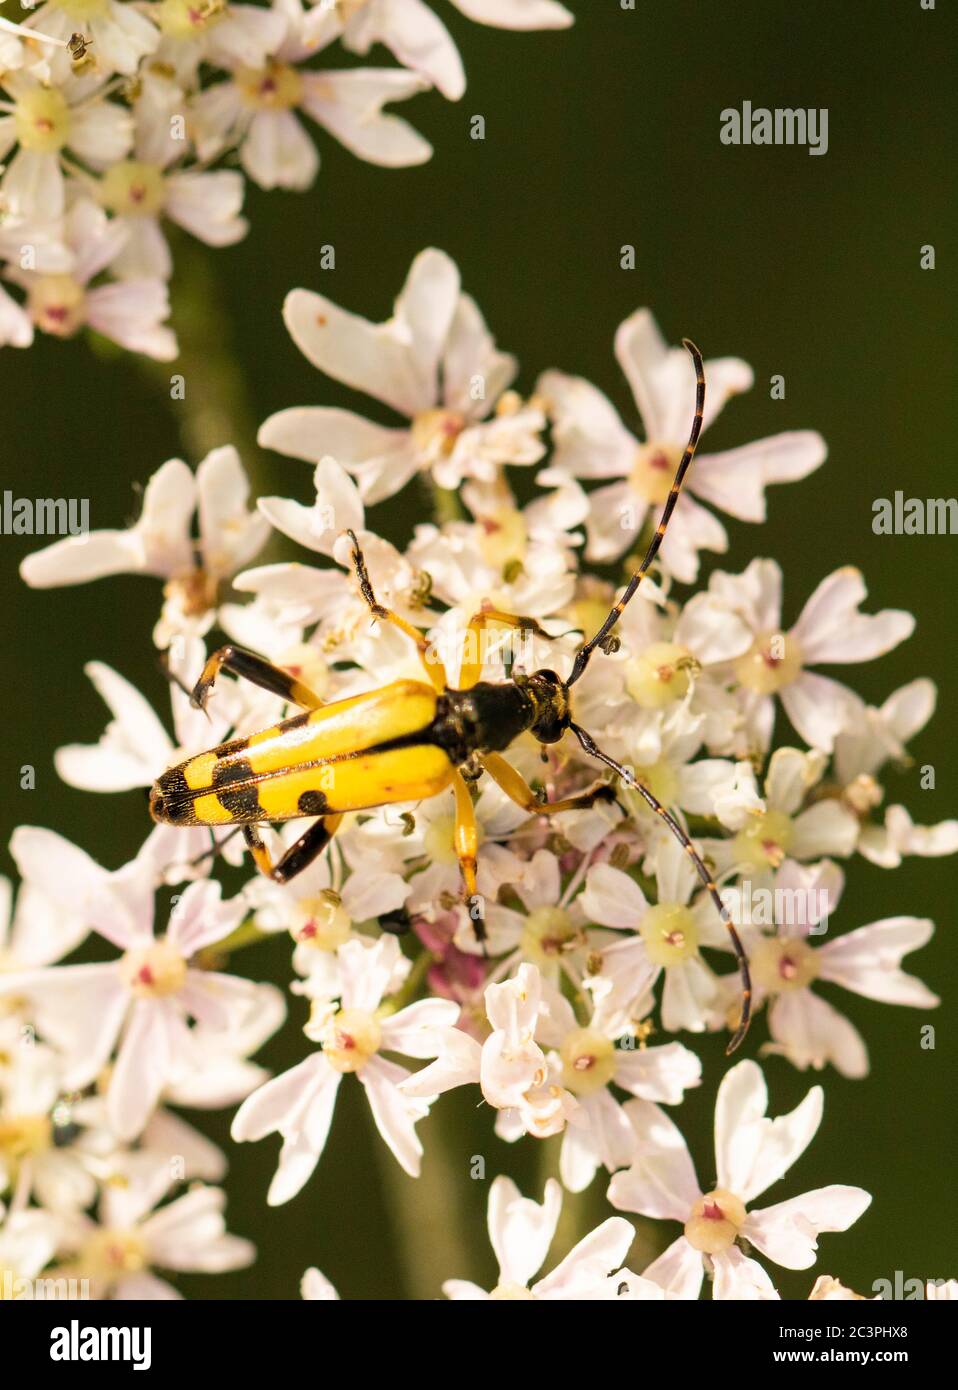 Rutpela maculata, cerambycidae,  yellow beetle perched on a flower, in the British countryside Stock Photo